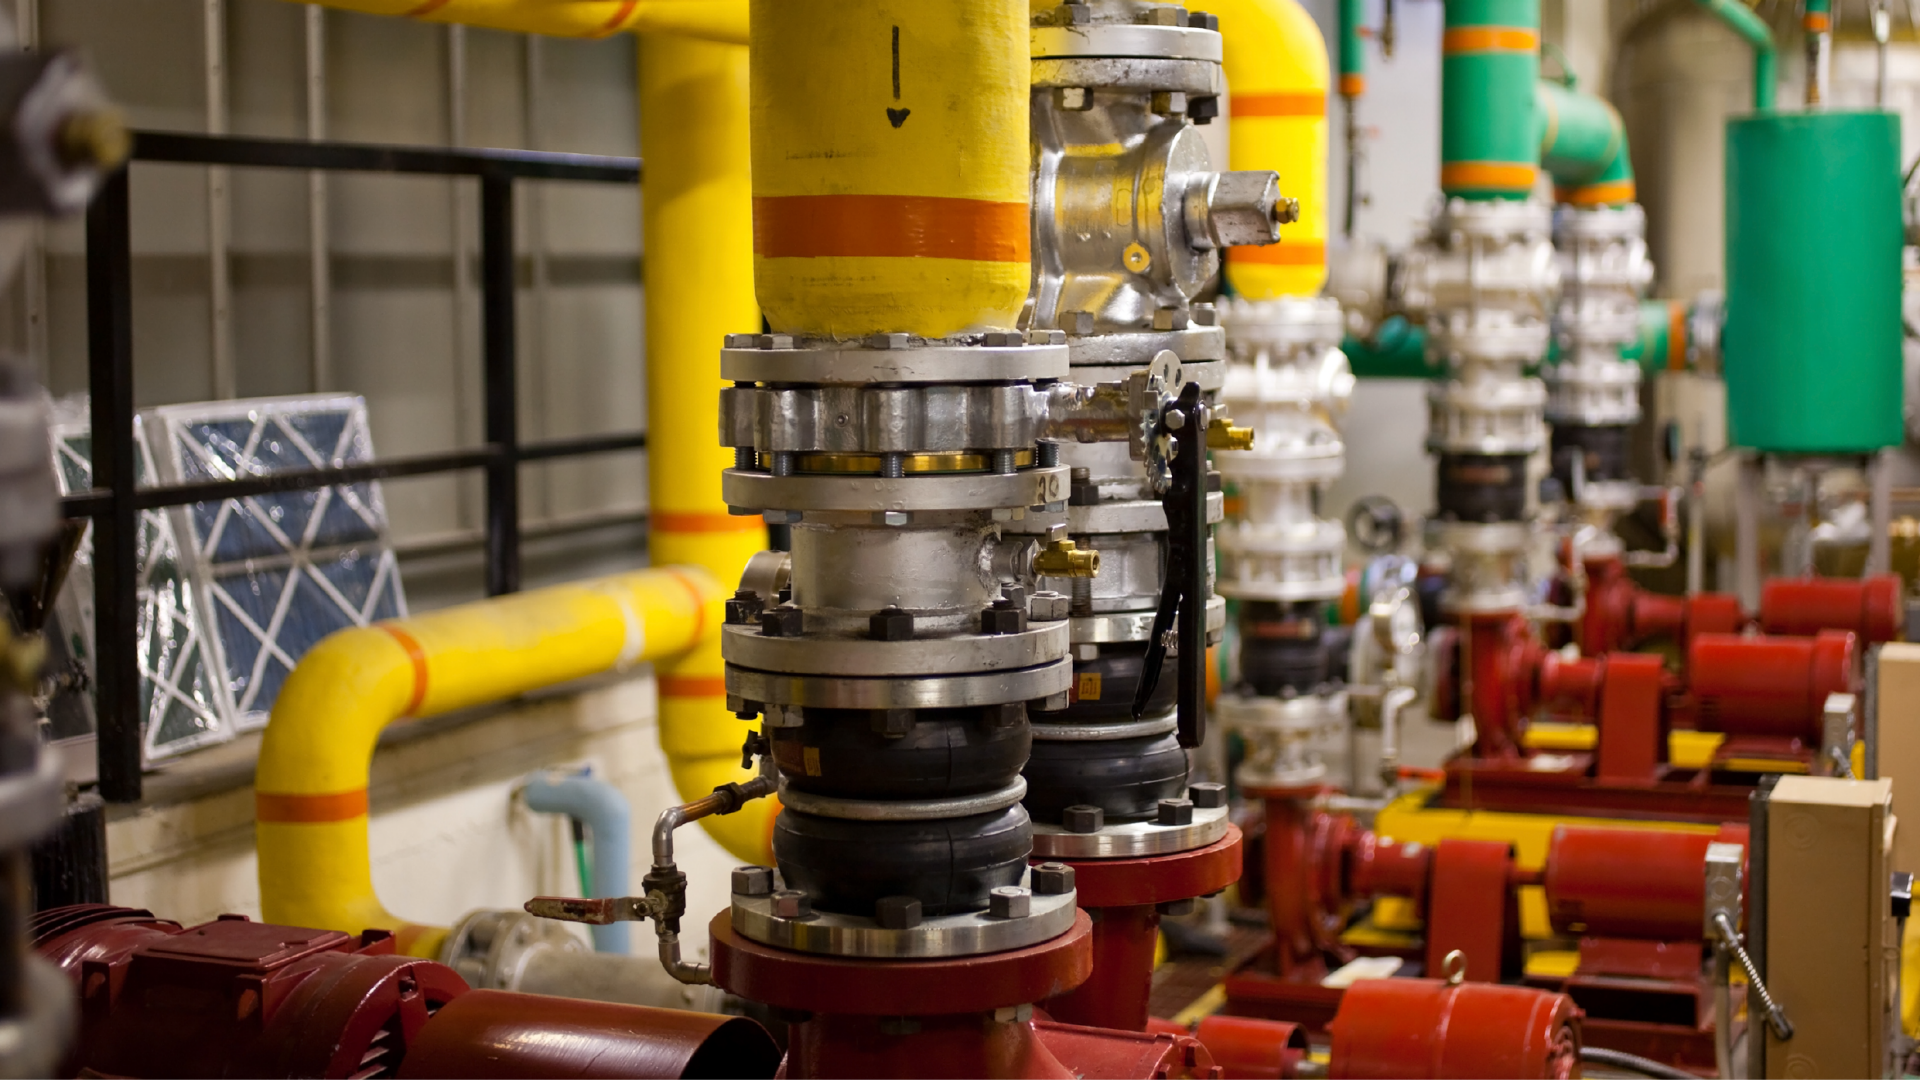 Multi-coloured pipes in a commercial boiler room